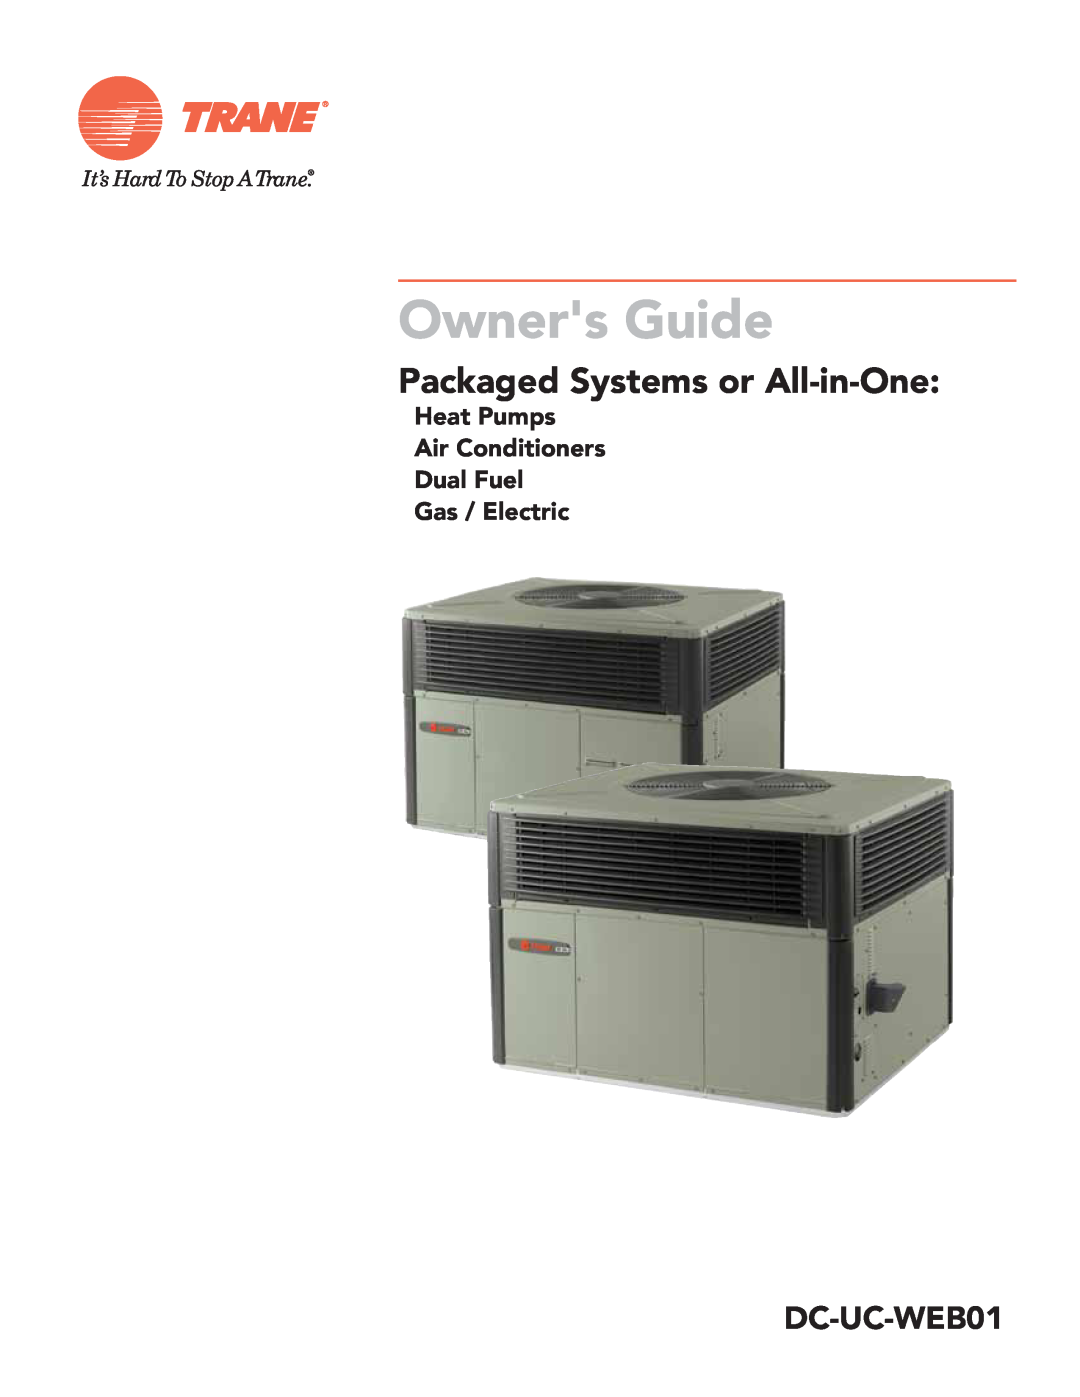 Trane Packaged Systems or All-in-One manual Owners Guide, DC-UC-WEB01, Heat Pumps Air Conditioners Dual Fuel 